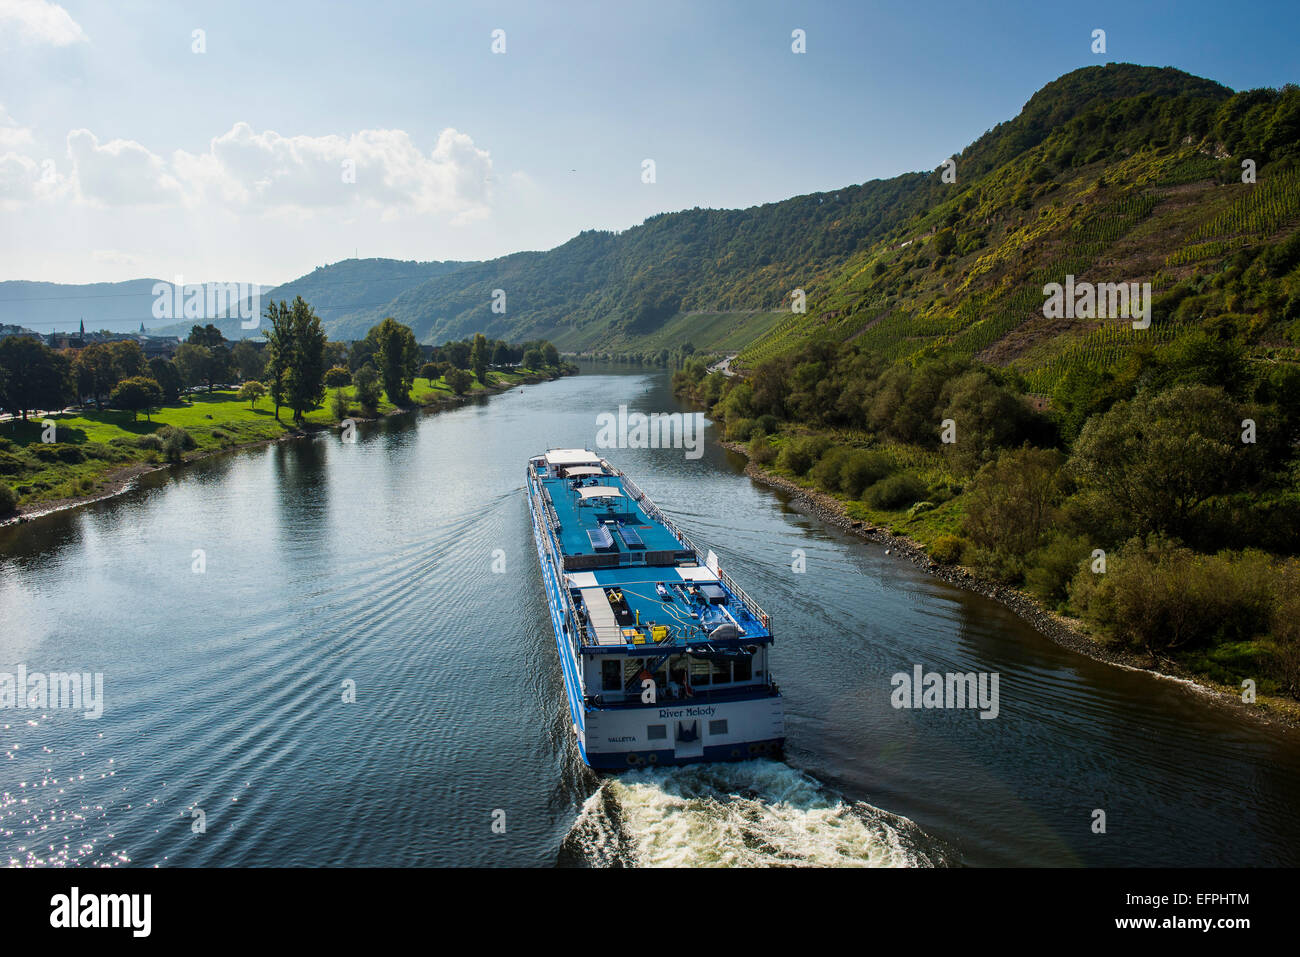 Cruise ship on the Moselle River passing Beilstein, Moselle Valley, Rhineland-Palatinate, Germany, Europe Stock Photo